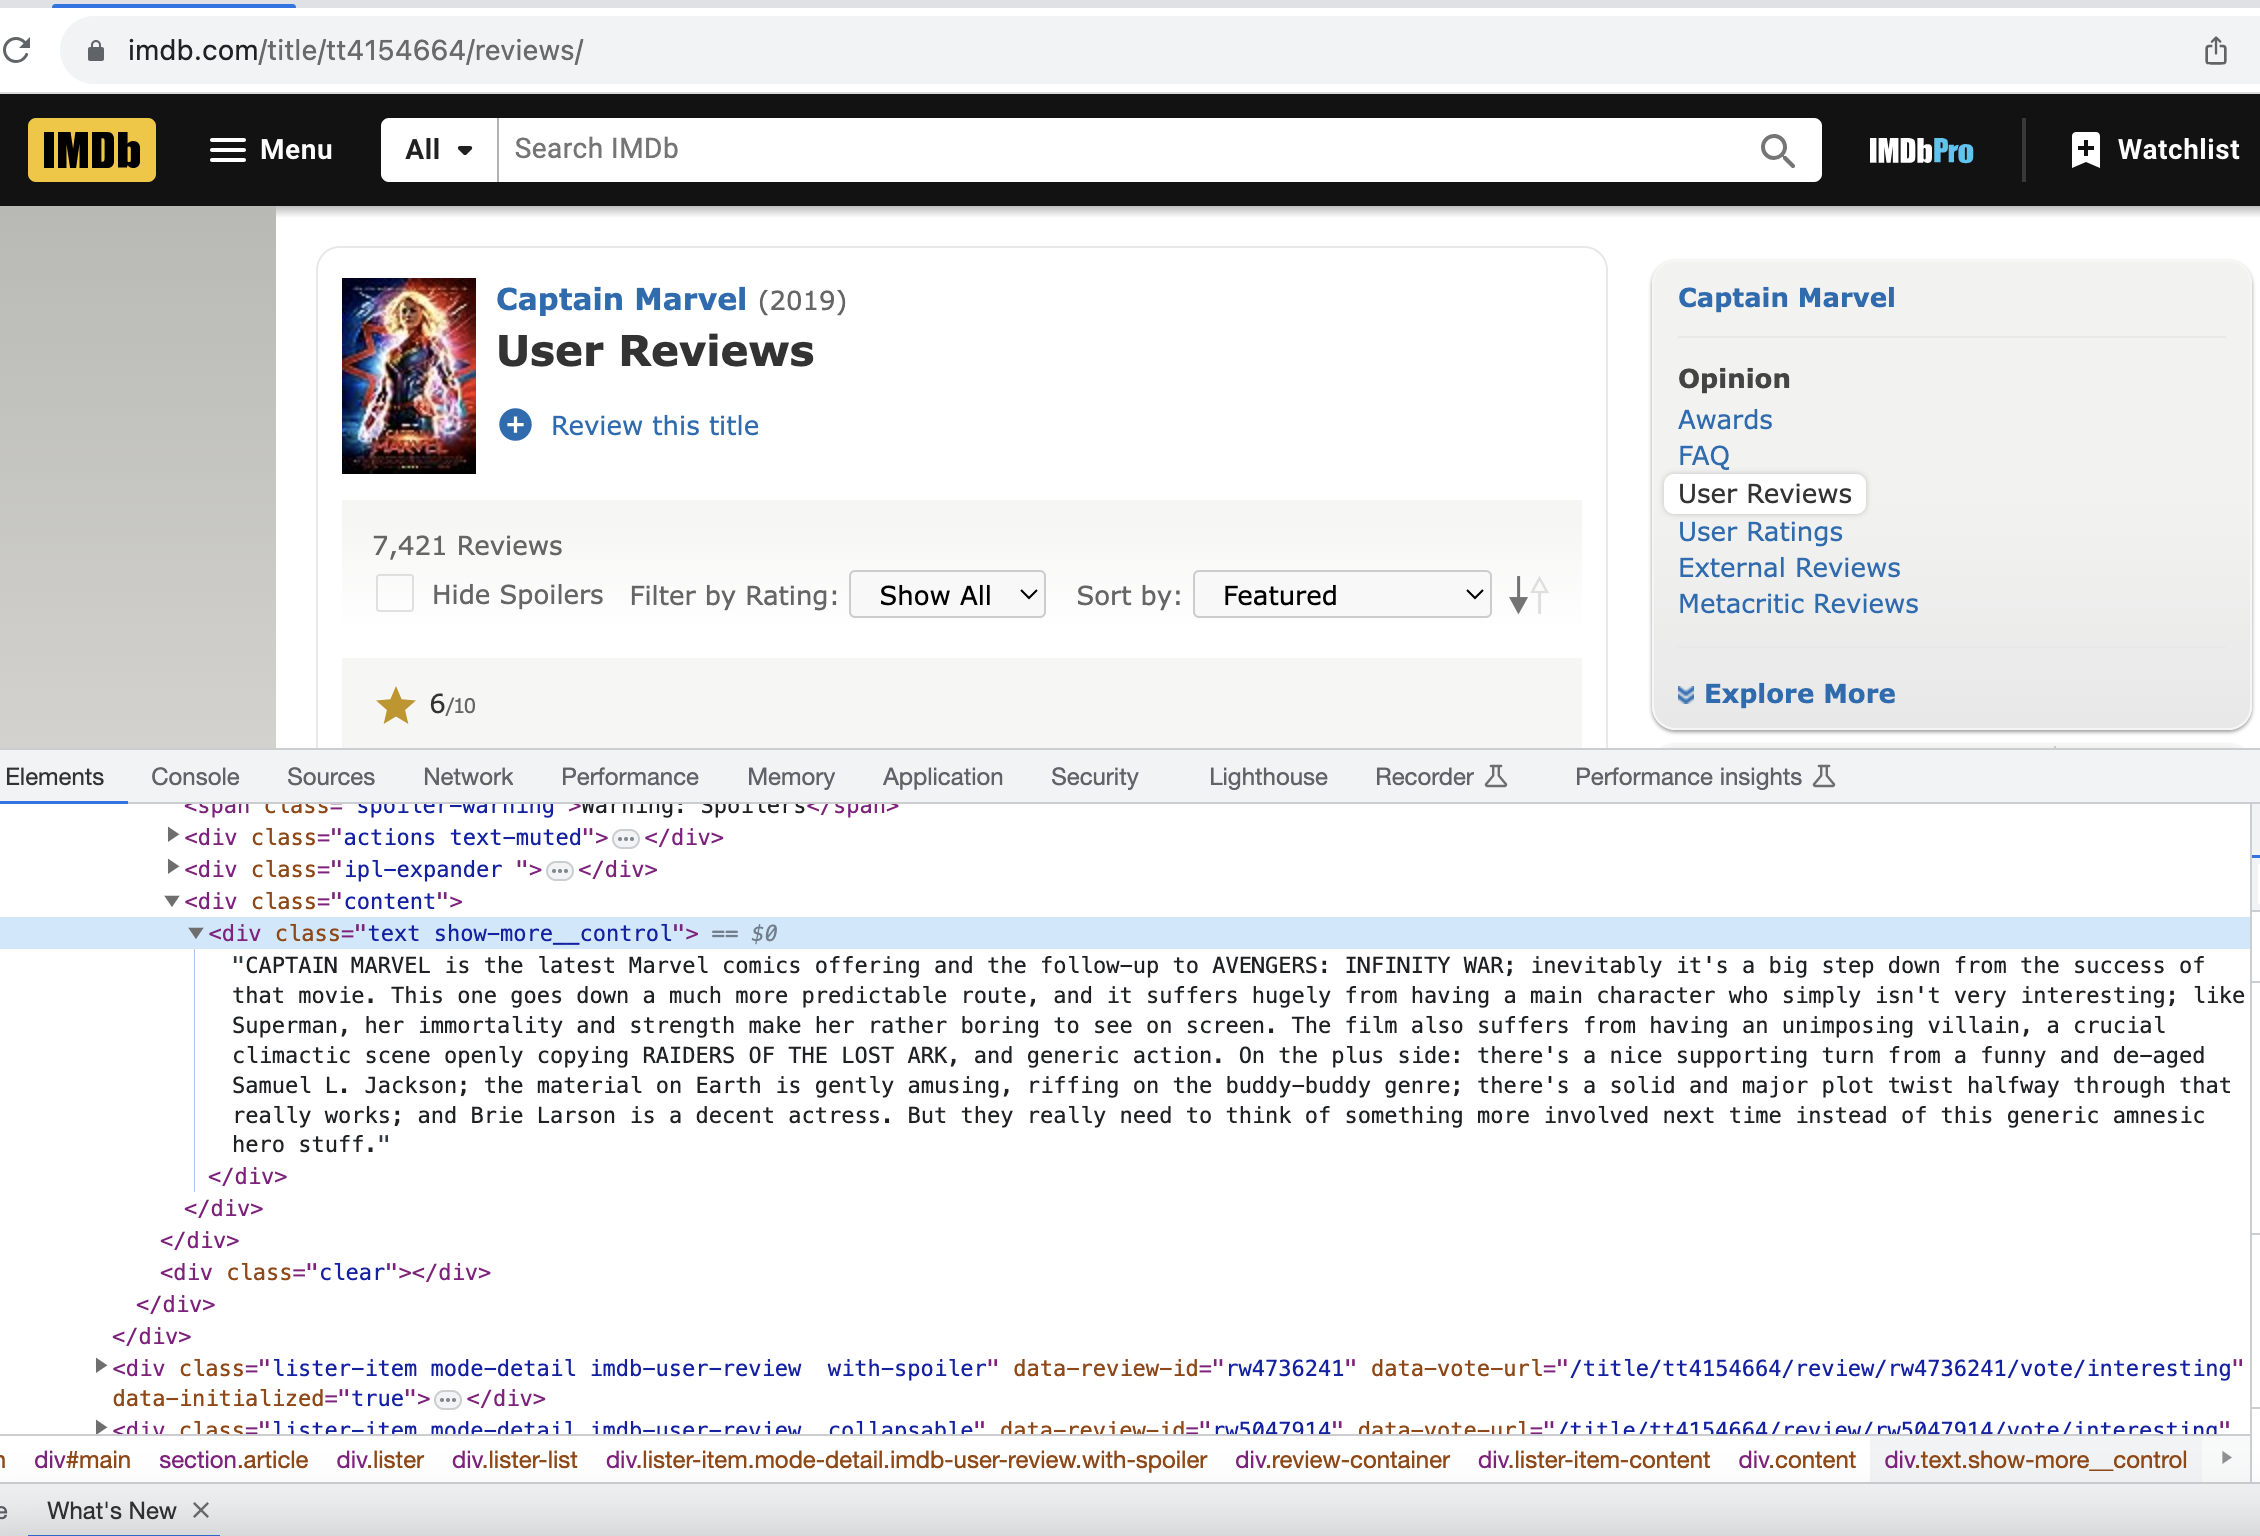 Web scraping IMBb reviews. Inspect element.